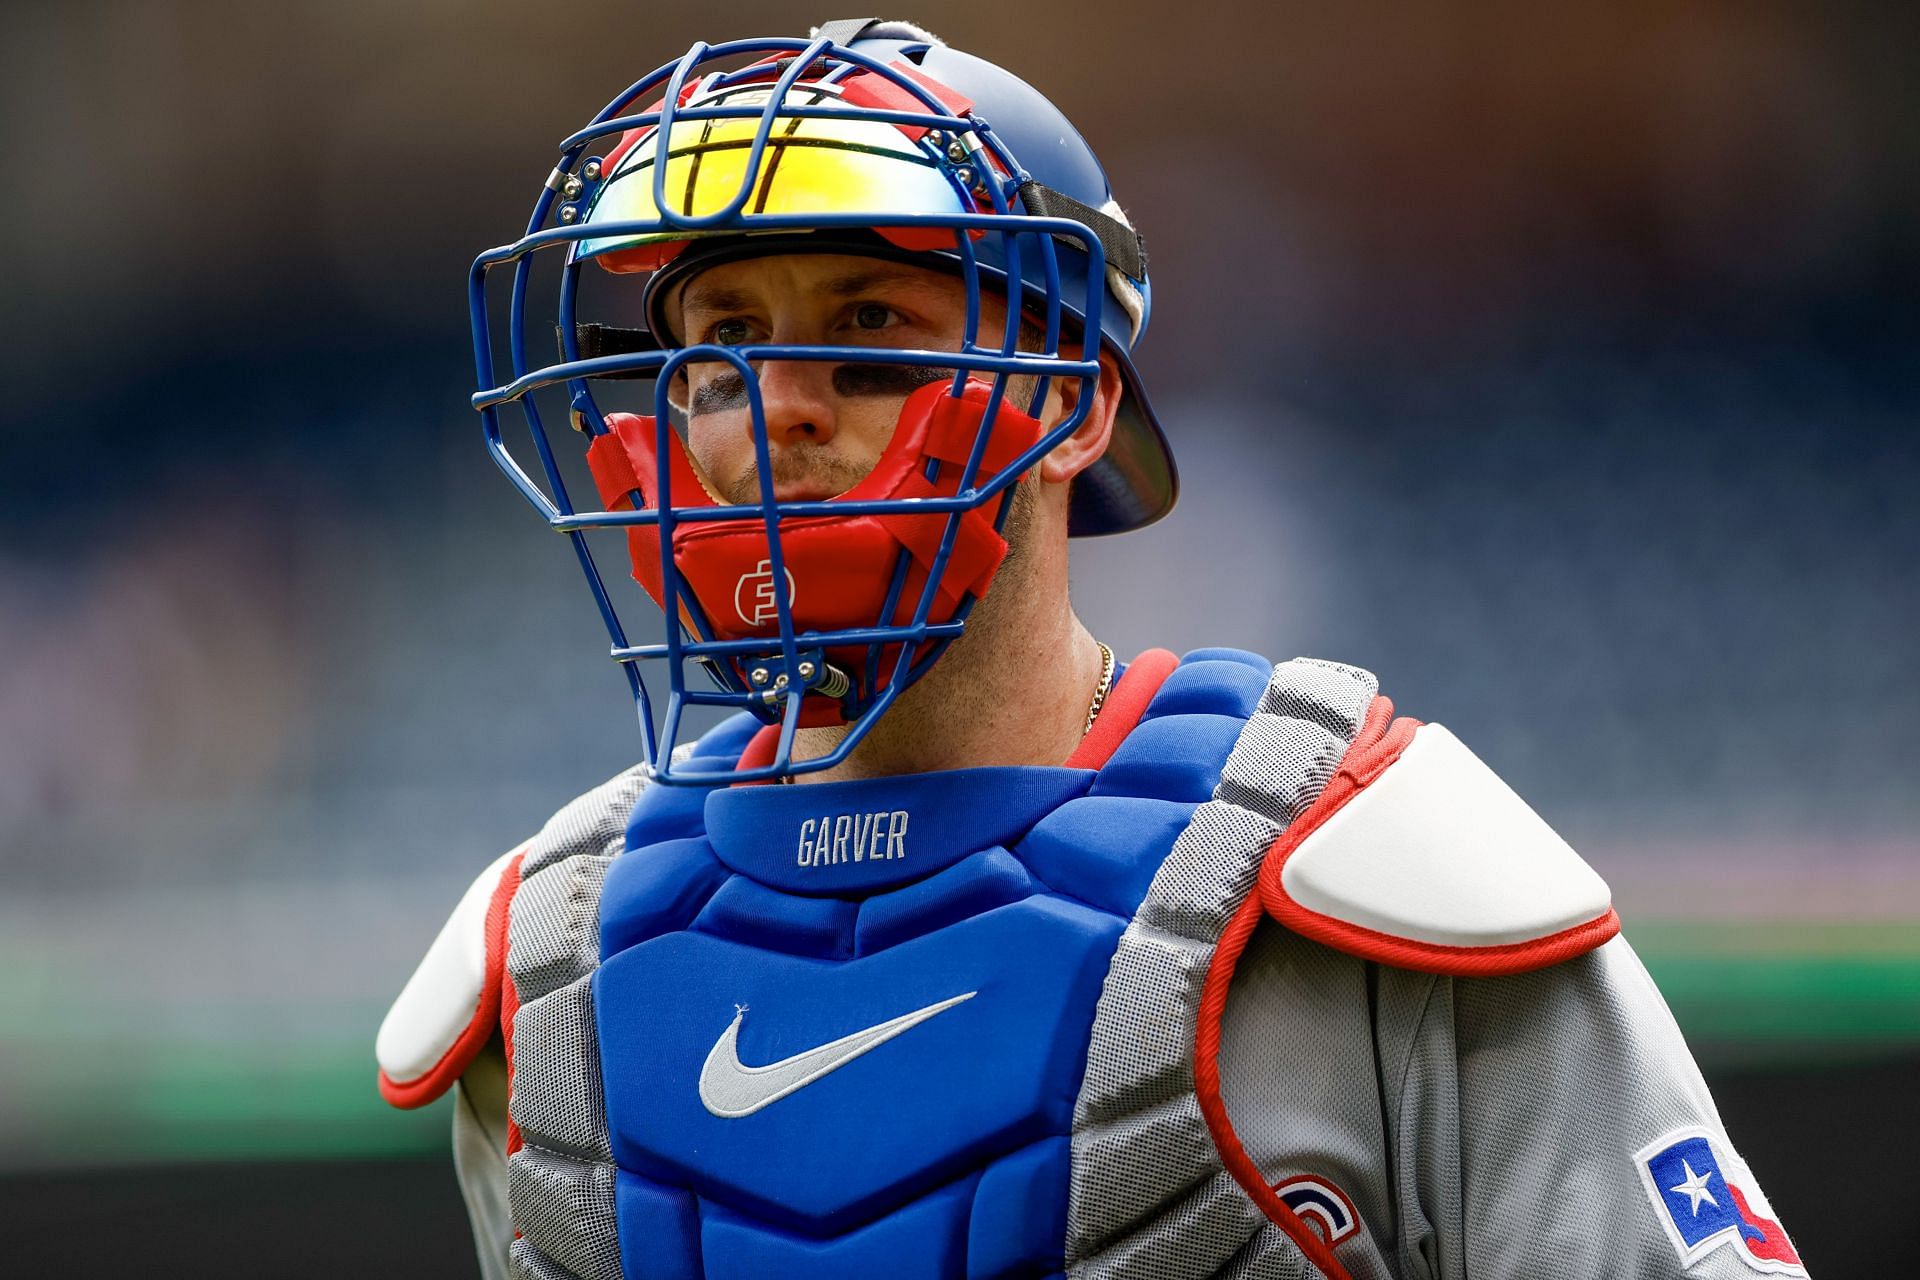 Rangers catcher Jonah Heim is playing well, but why did he cut his